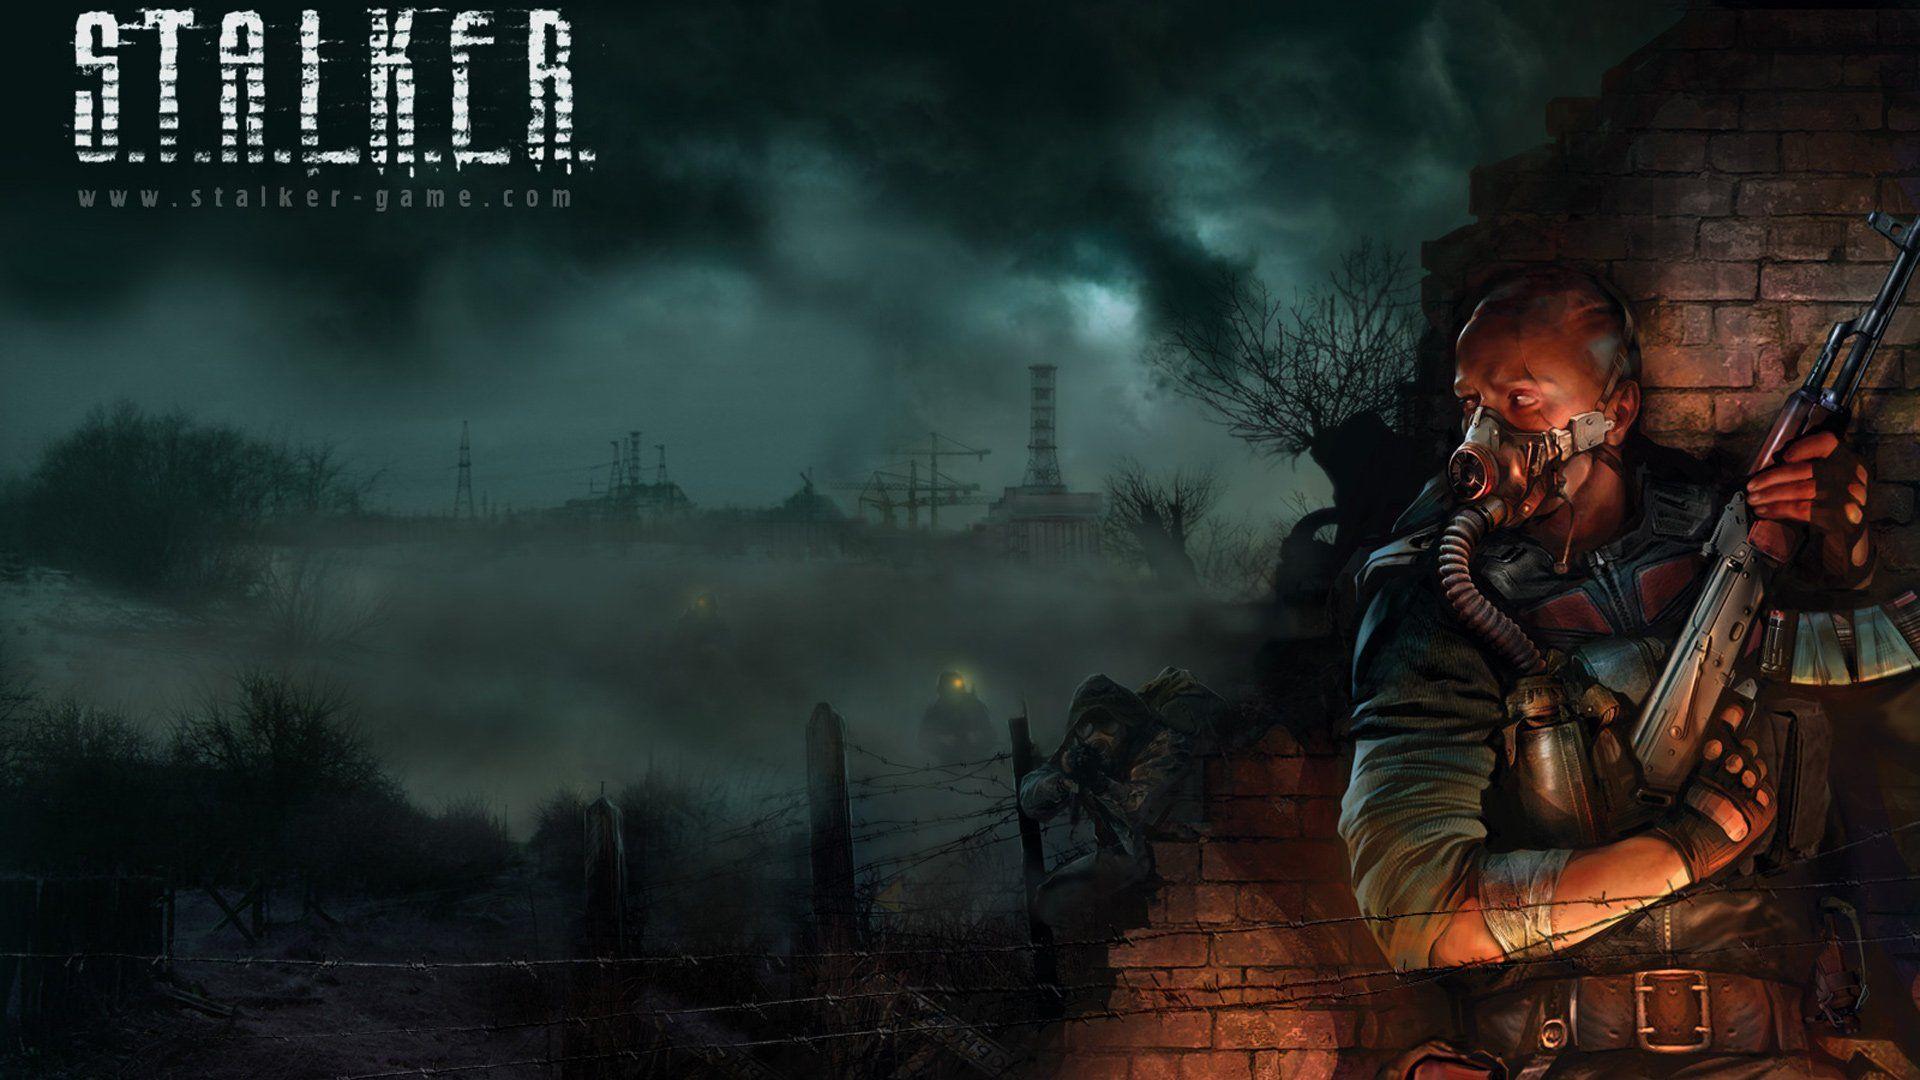 S.T.A.L.K.E.R.: Shadow of Chernobyl Full HD Wallpaper and Background